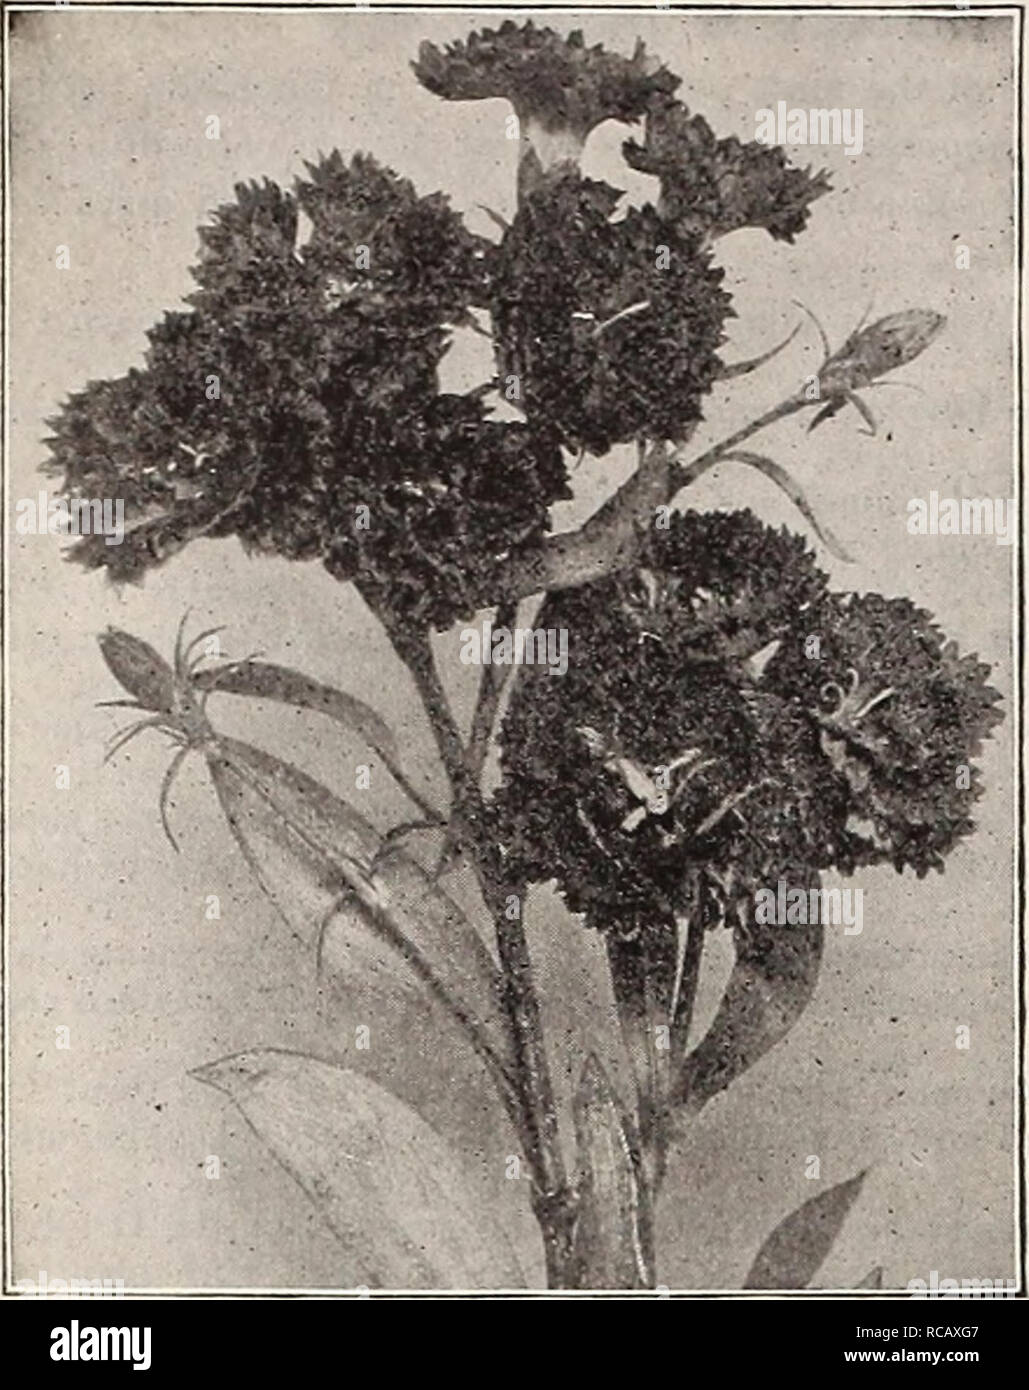 . Dreer's garden book : seventy-third annual edition 1911. Seeds Catalogs; Nursery stock Catalogs; Gardening Equipment and supplies Catalogs; Flowers Seeds Catalogs; Vegetables Seeds Catalogs; Fruit Seeds Catalogs. 214 Hj HfflRTADRKR -fflllADtLPtilA PA JMHARDY PEREHHIAL PbANTJ. Diklvtra Spectabilis (Bleeding Heart). Dianthus Latifolius Atrococcineus Fl. Pl. DIANTHUS. Deltoides [MaidenPink). A charm- ing creeping variety, with medium- sized pink flowers; especially suited for the rock garden. — Alba. A pretty white-flowered form. Fettes Mount. A charming variety of the Hardy Mule Pink, which du Stock Photo